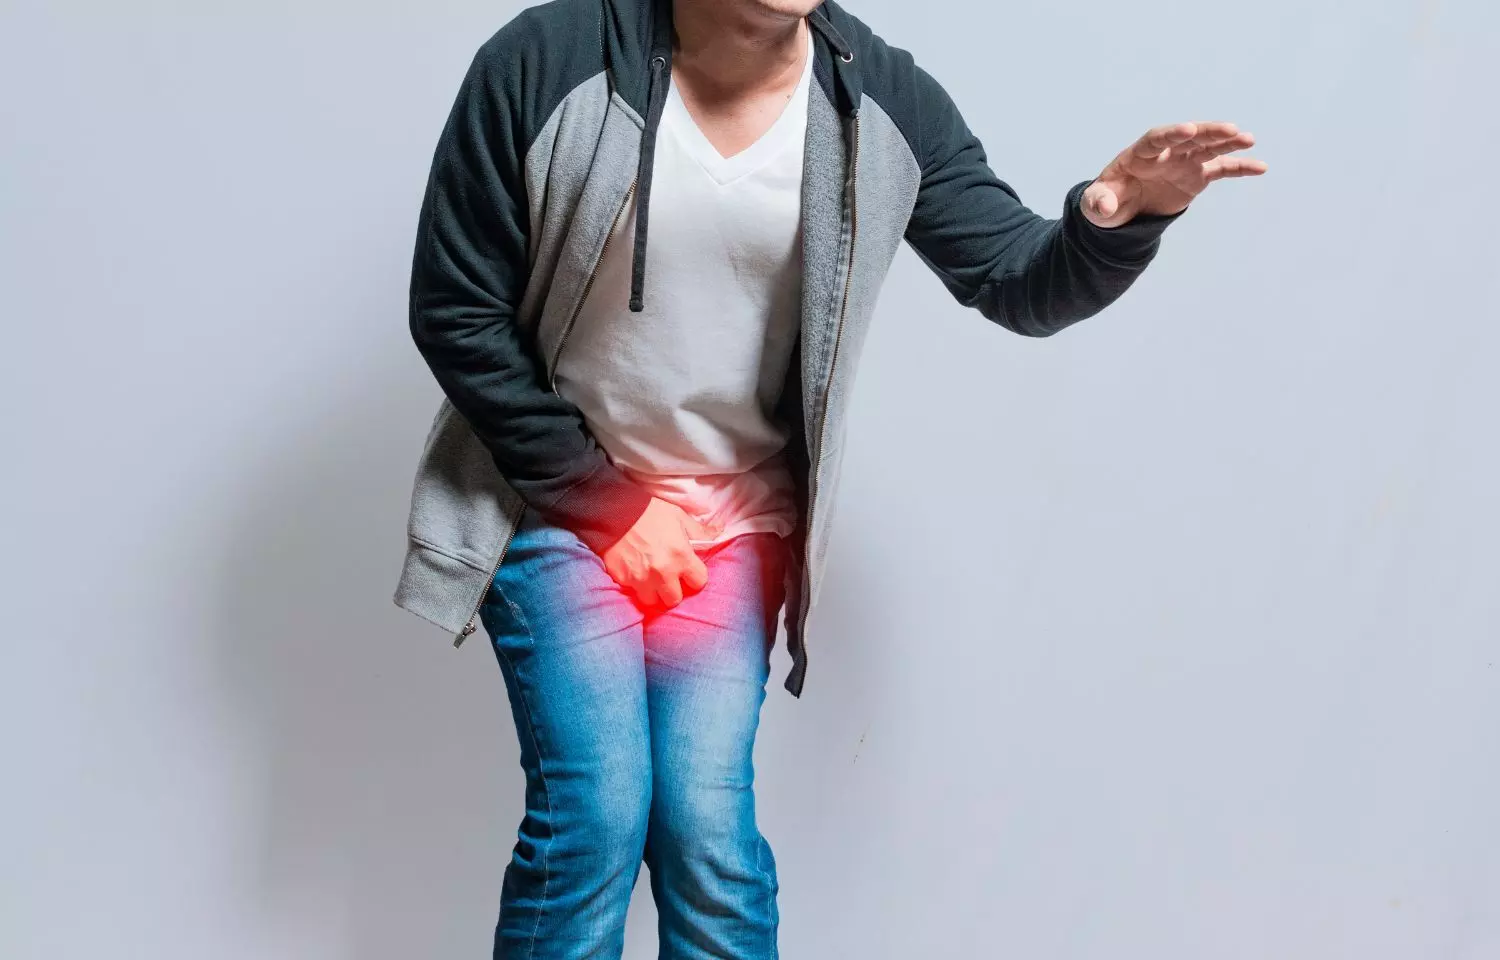 Prasterone shows promise in reducing severity of urinary urge incontinence